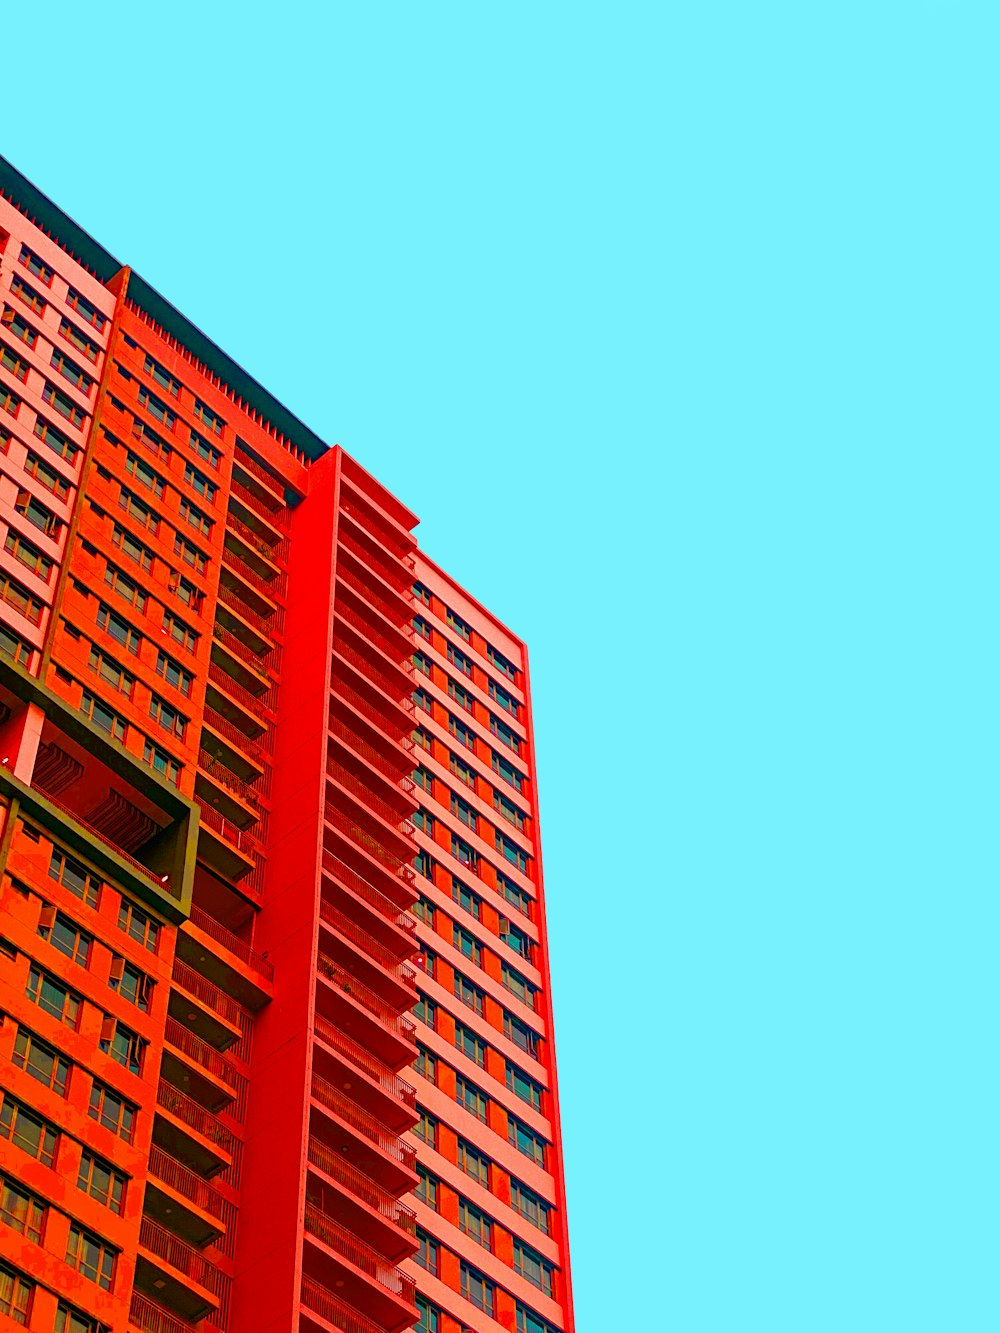 red concrete building under blue sky during daytime